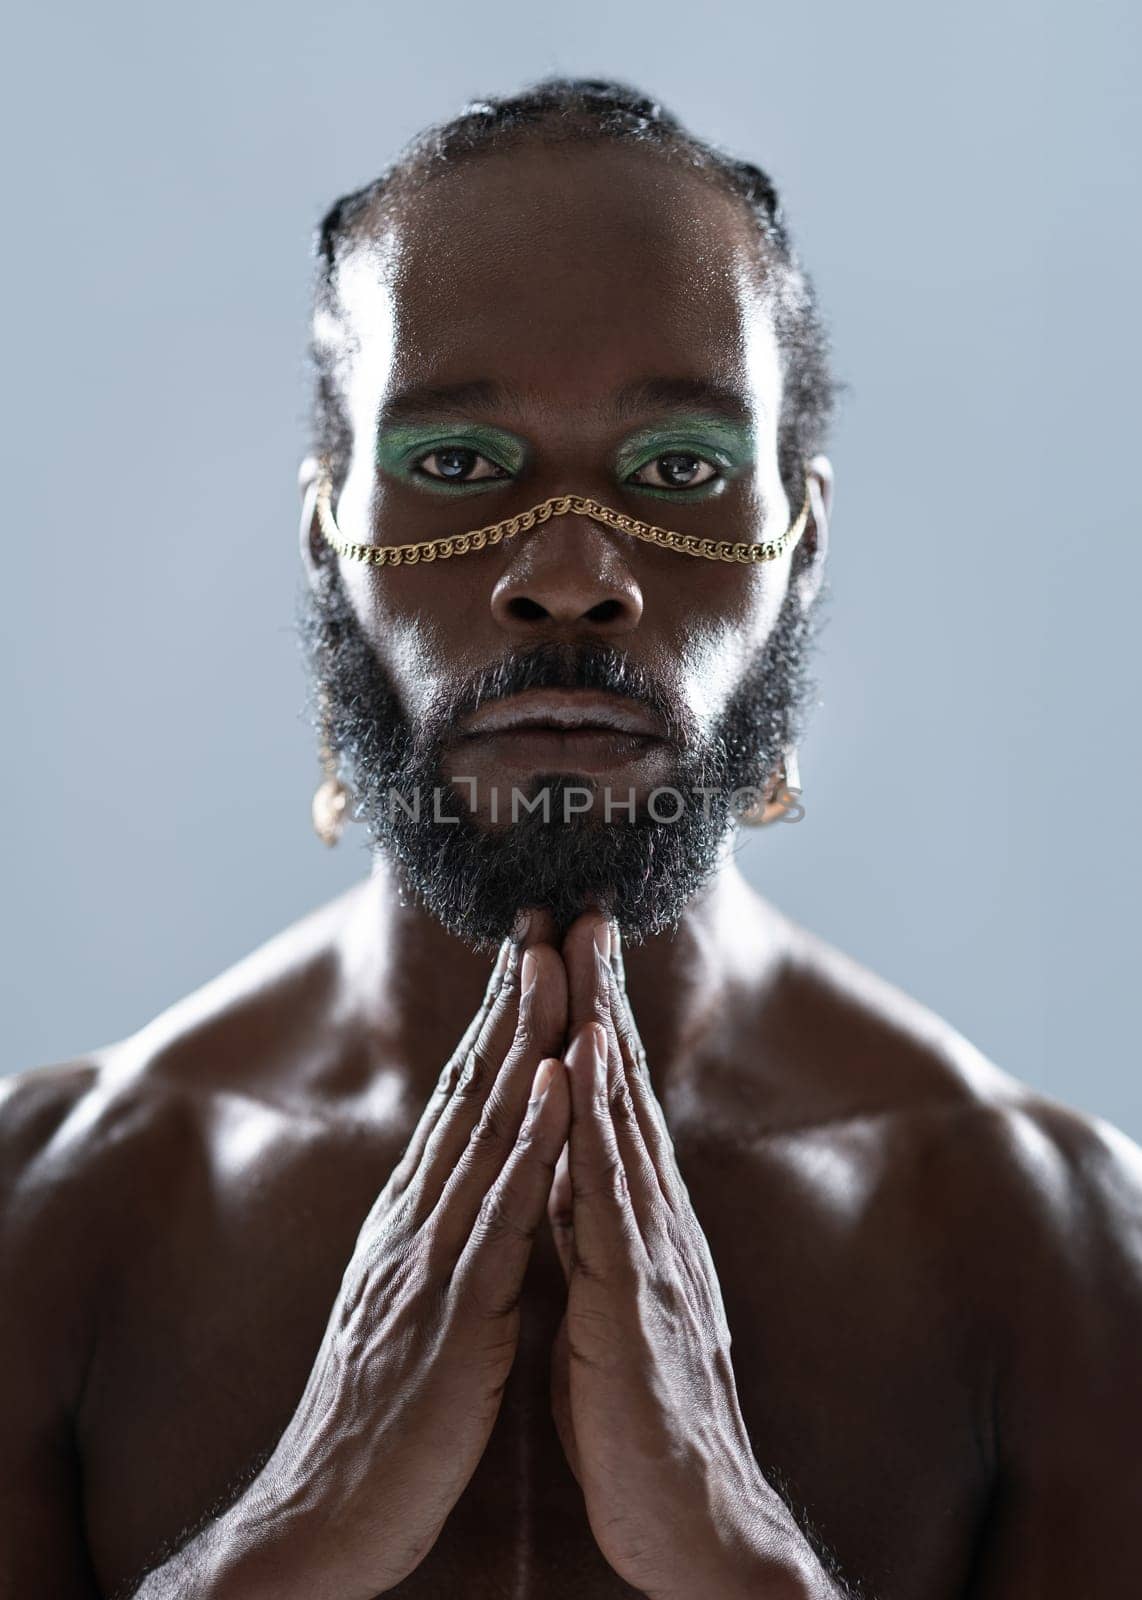 Portrait of serious African American gay man with blue eyeshadows and golden accessory on face. Shirtless adult transgender joining hands and looking at camera on blue background.